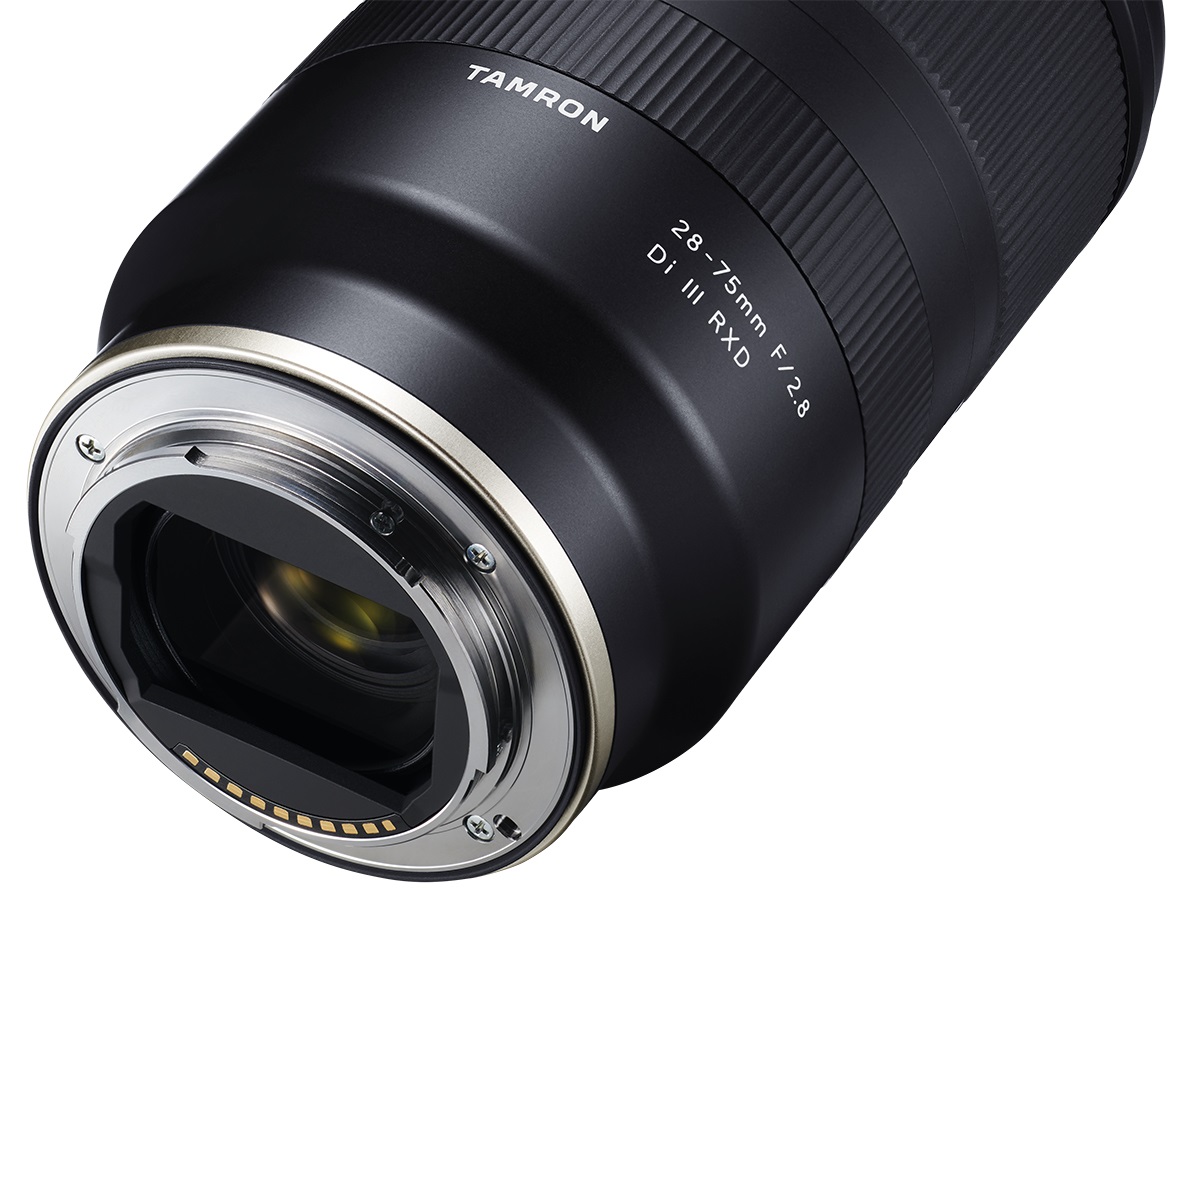 Ống Kính Tamron 28-75mm f/2.8 Di III RXD Lens for Sony E